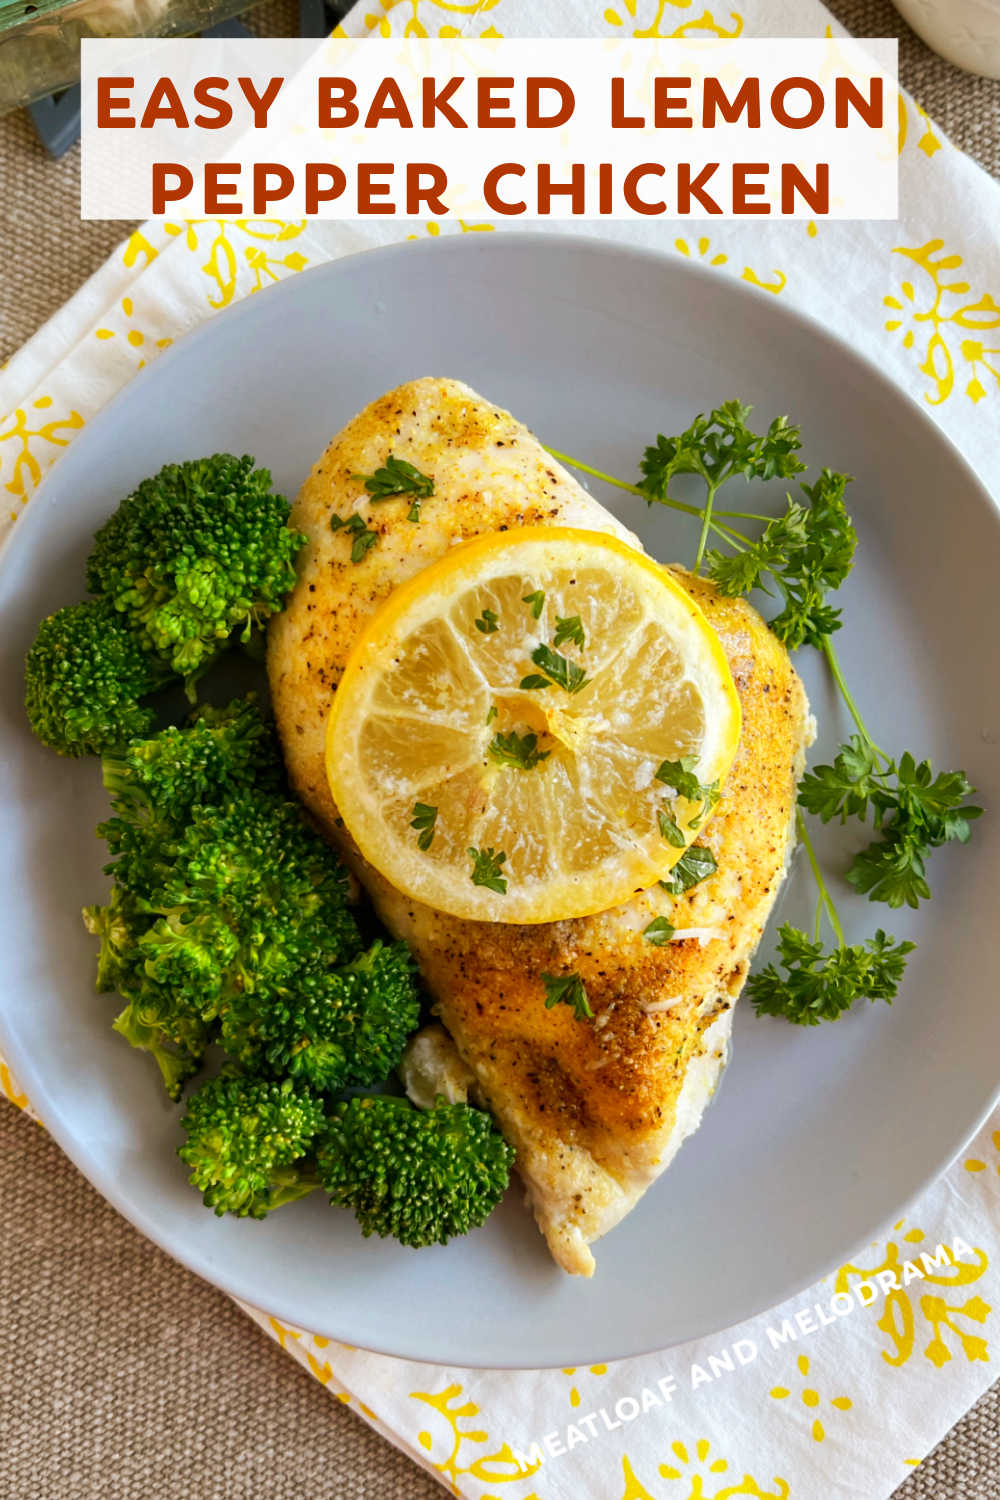 Baked Lemon Pepper Chicken is an easy recipe with chicken breasts baked in the oven with lemon pepper seasoning until tender and juicy. Your whole family will love this delicious easy dinner! via @meamel